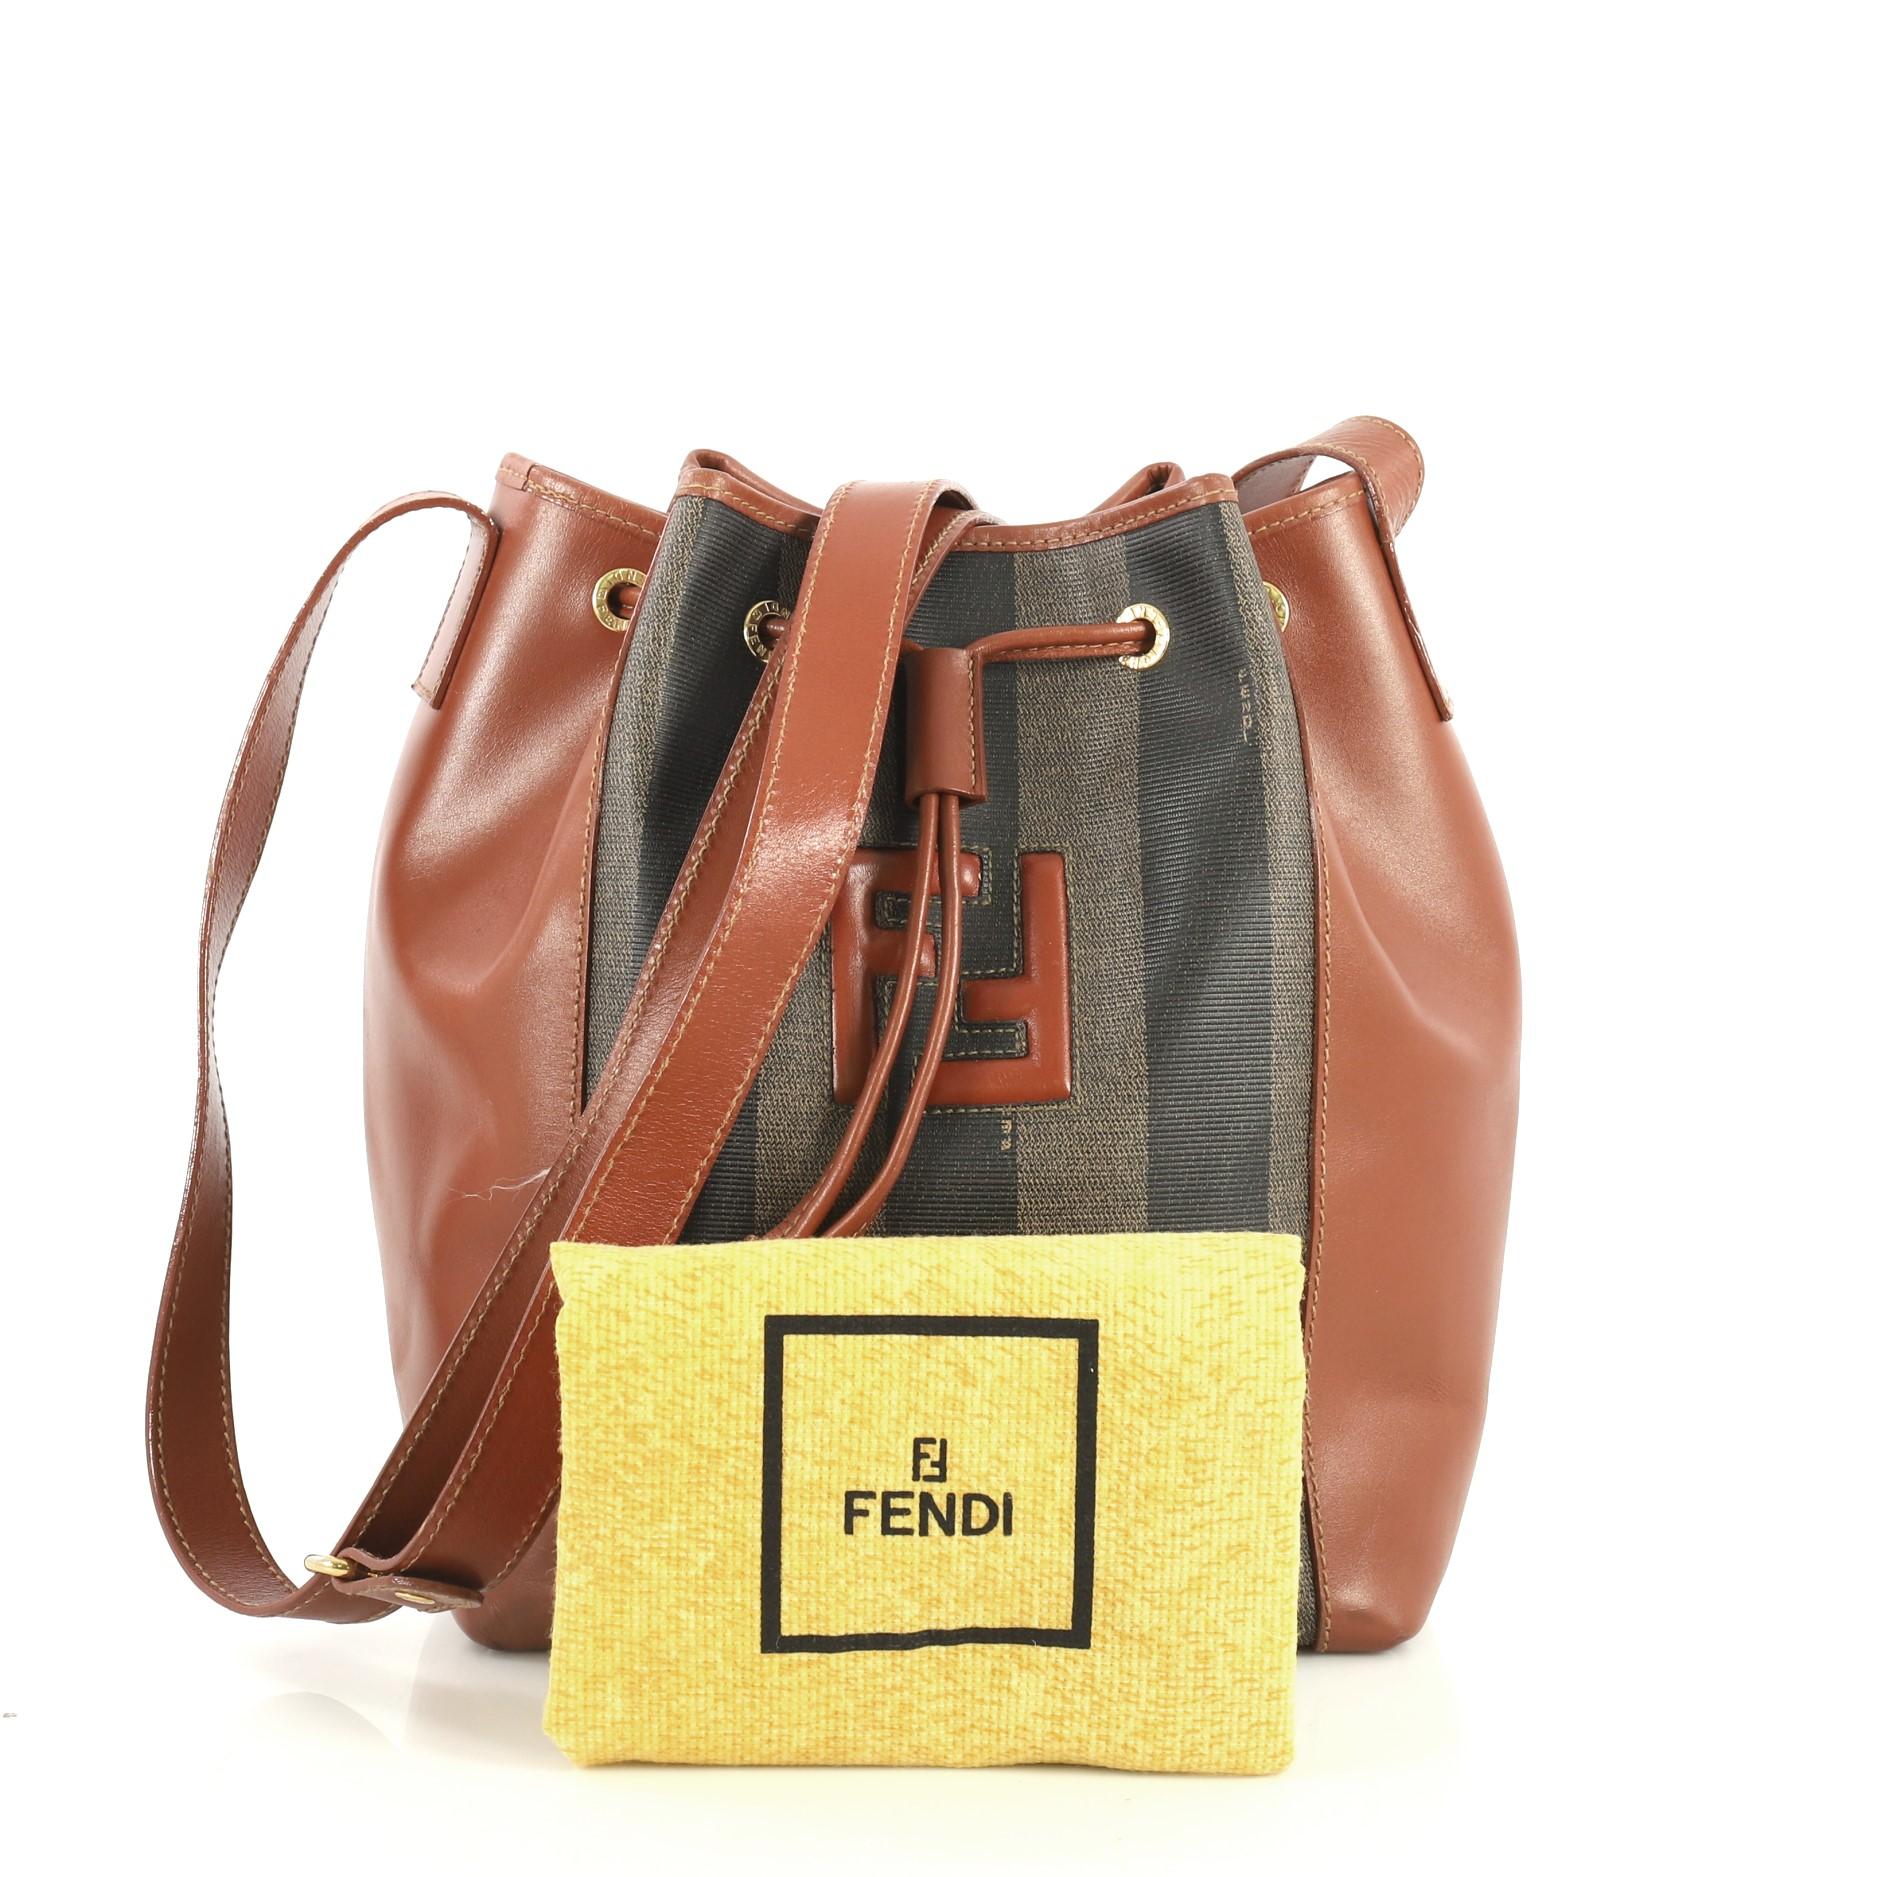 This Fendi Vintage Pequin Bucket Bag Coated Canvas and Leather Small, crafted in Pequin Striped coated canvas and brown leather, features adjustable flat leather shoulder strap and gold-tone hardware. Its drawstring closure opens to a black fabric